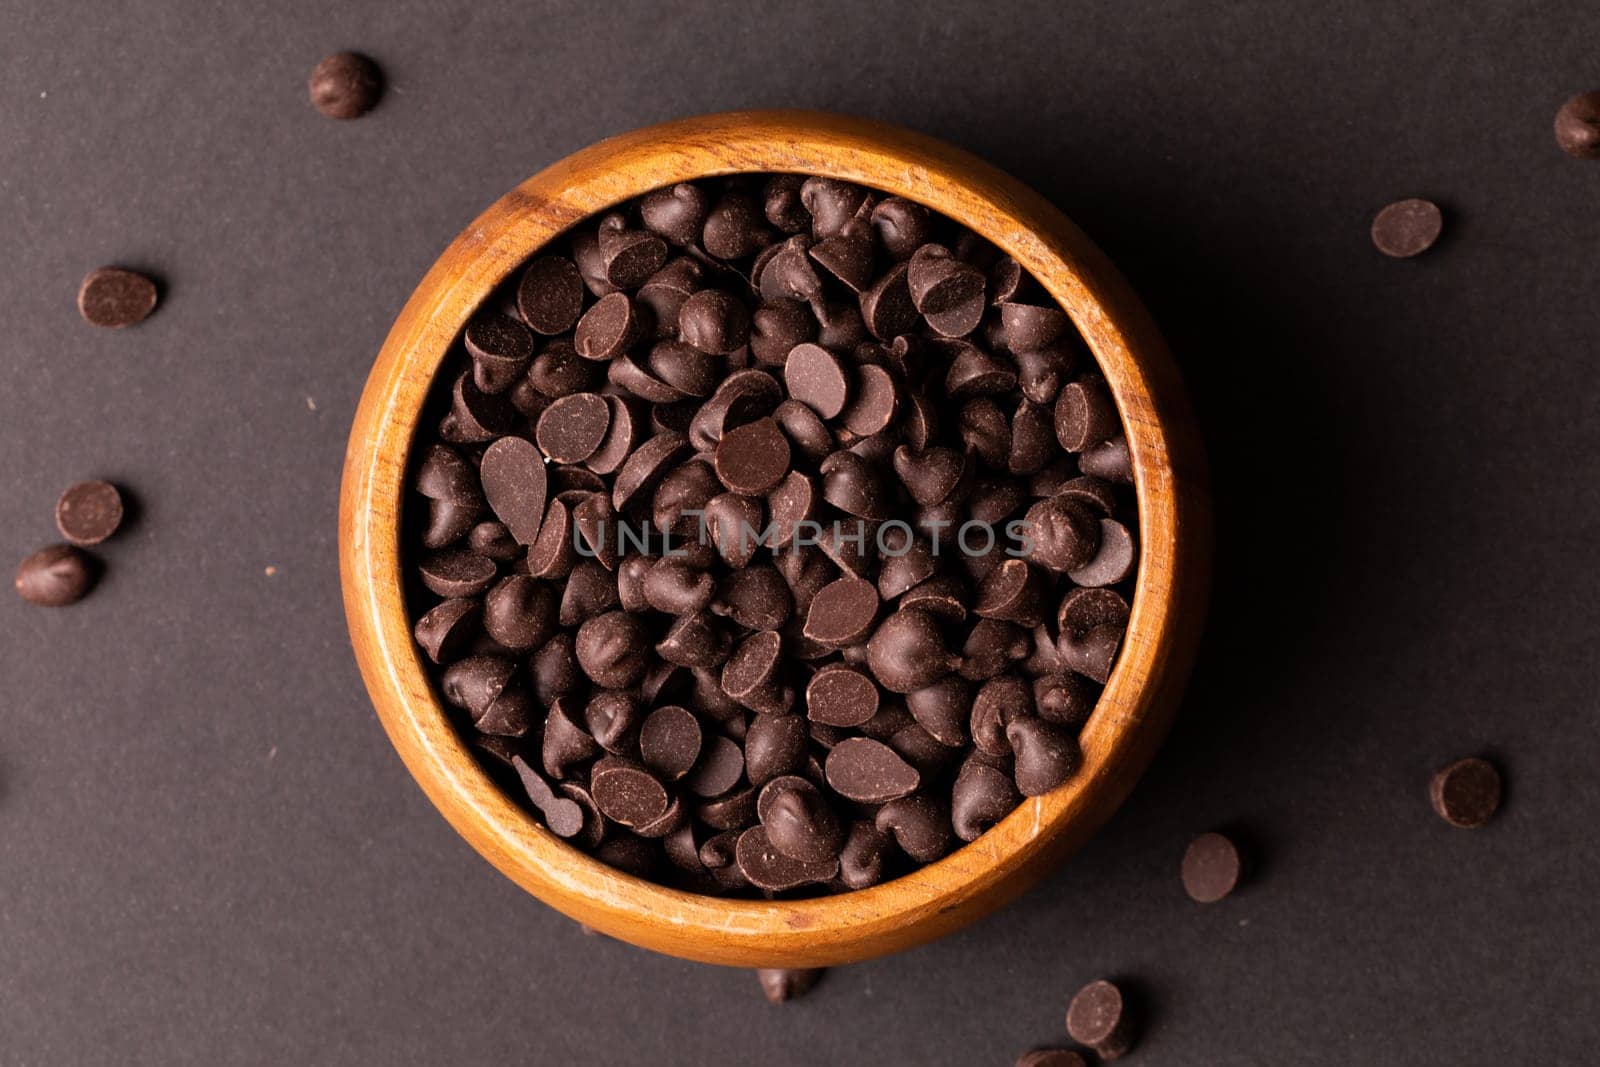 Directly above view of fresh chocolate chips in wooden bowl over colored background. unaltered, sweet food and unhealthy eating concept.